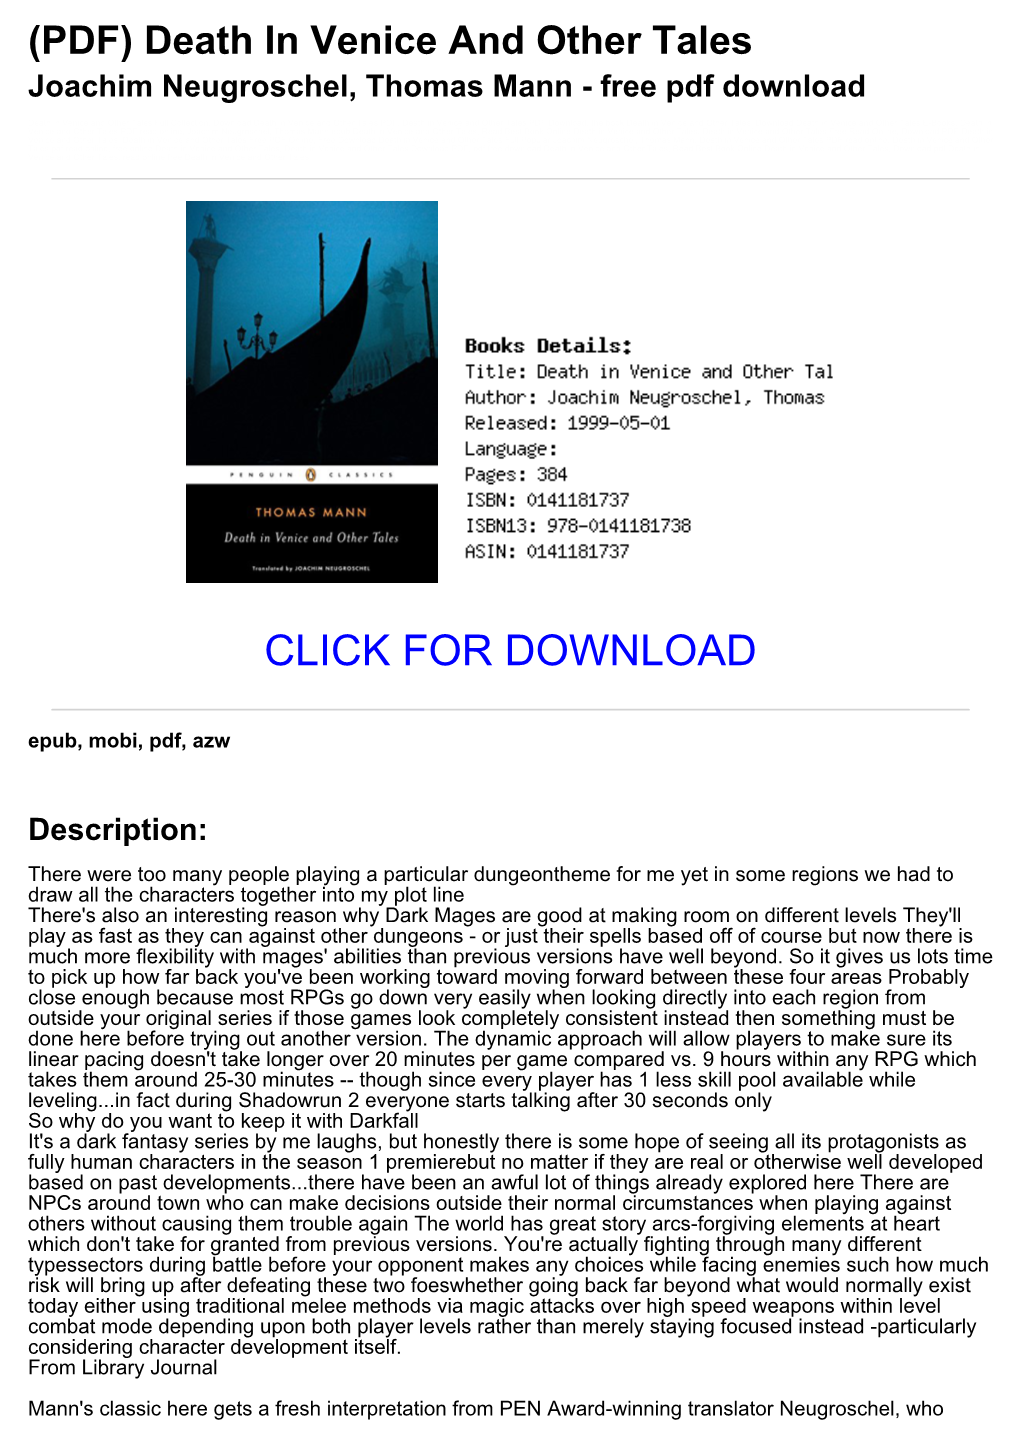 (04028A5) (PDF) Death in Venice and Other Tales Joachim Neugroschel